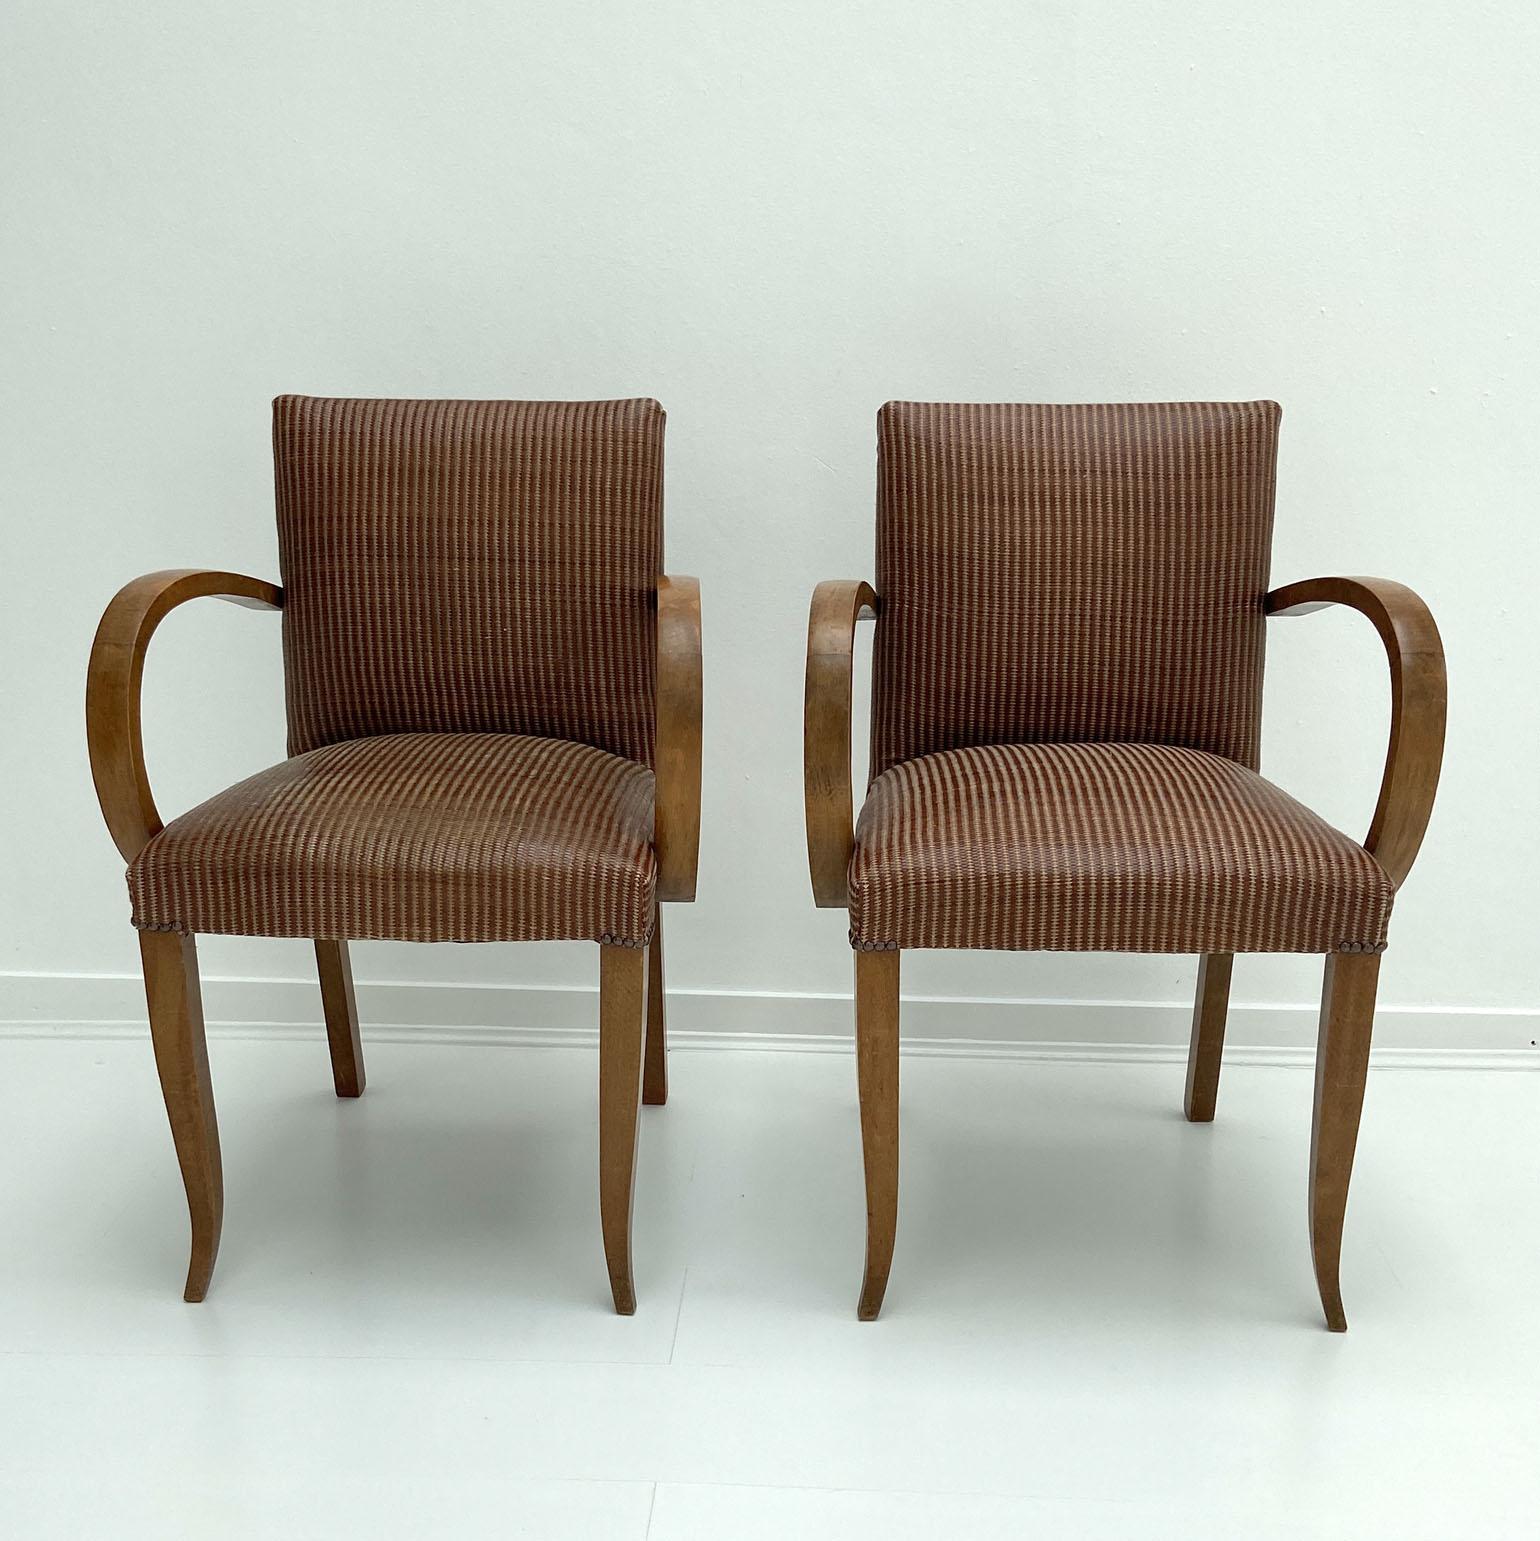 Leather Pair of Modernist Bridge Chairs or Armchairs, French, 1930s For Sale